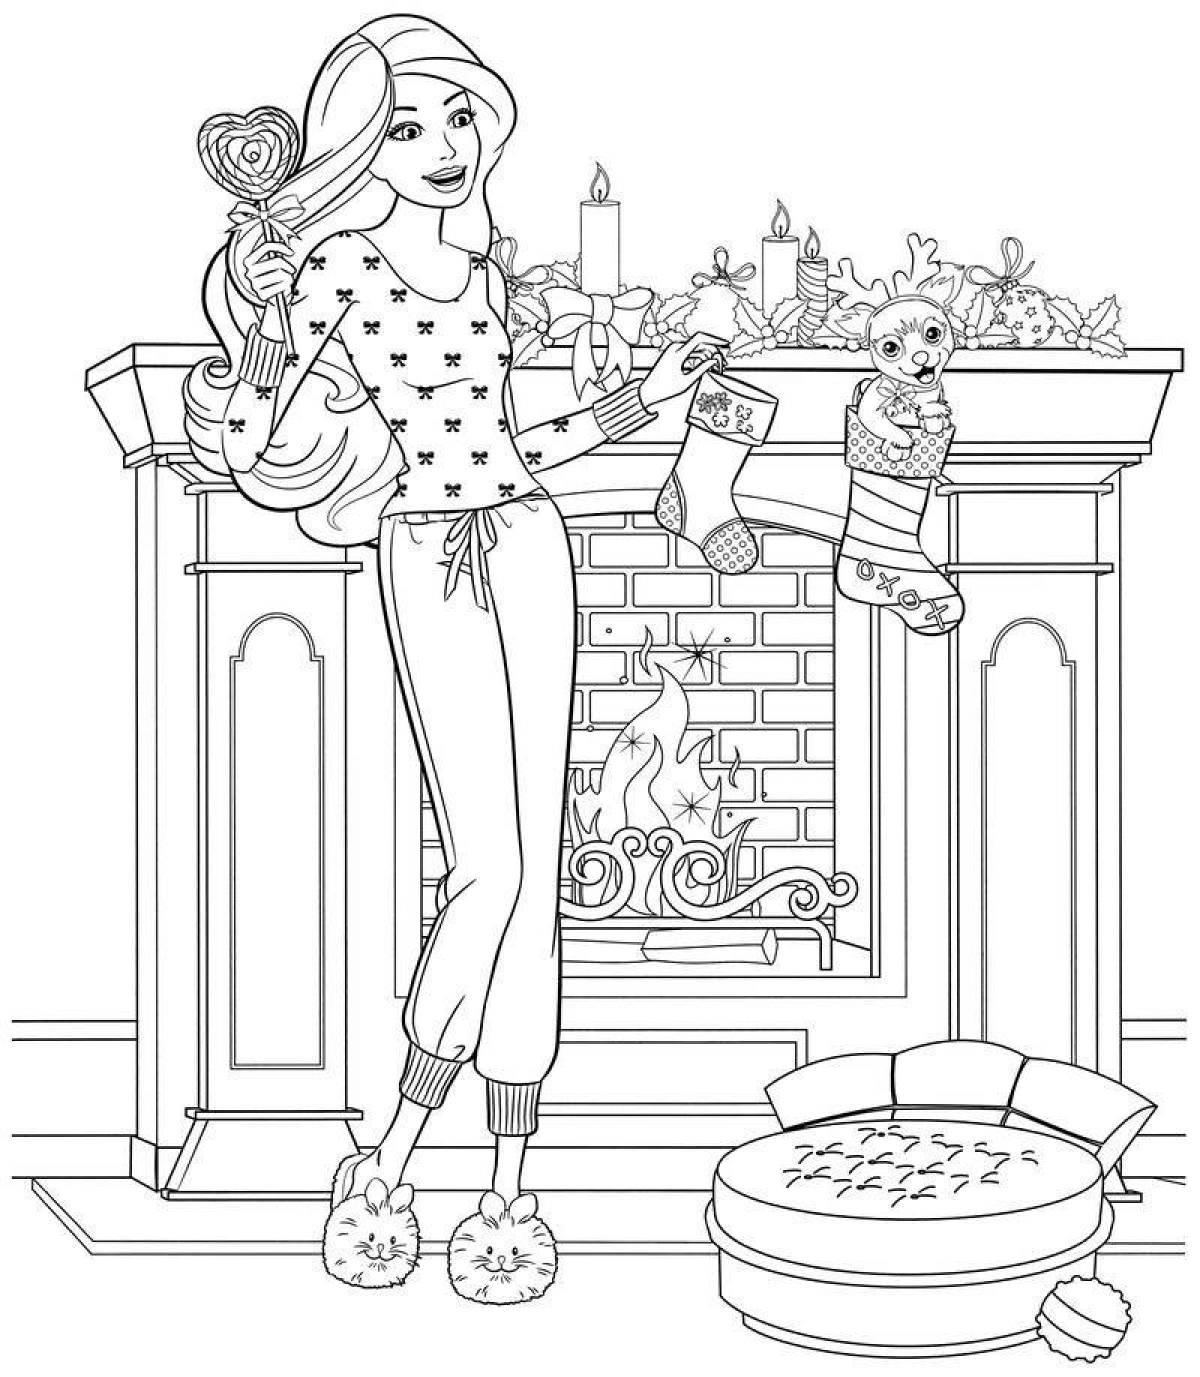 Exquisite barbie christmas coloring book